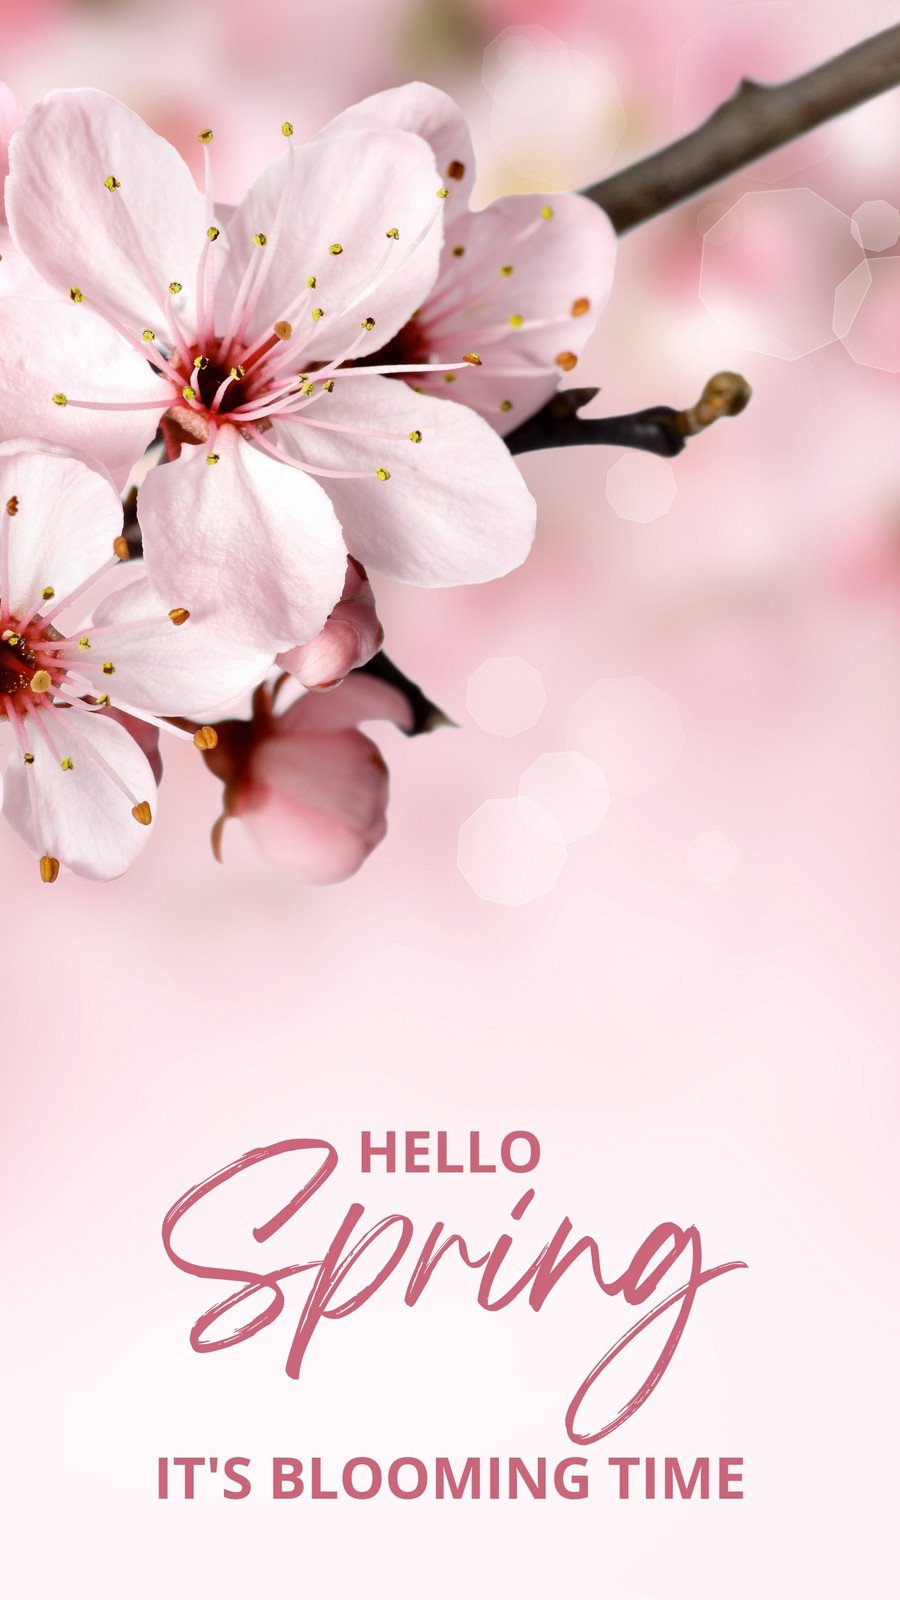 Customize 432+ Spring Aesthetic Phone Wallpaper Templates Online - Canva